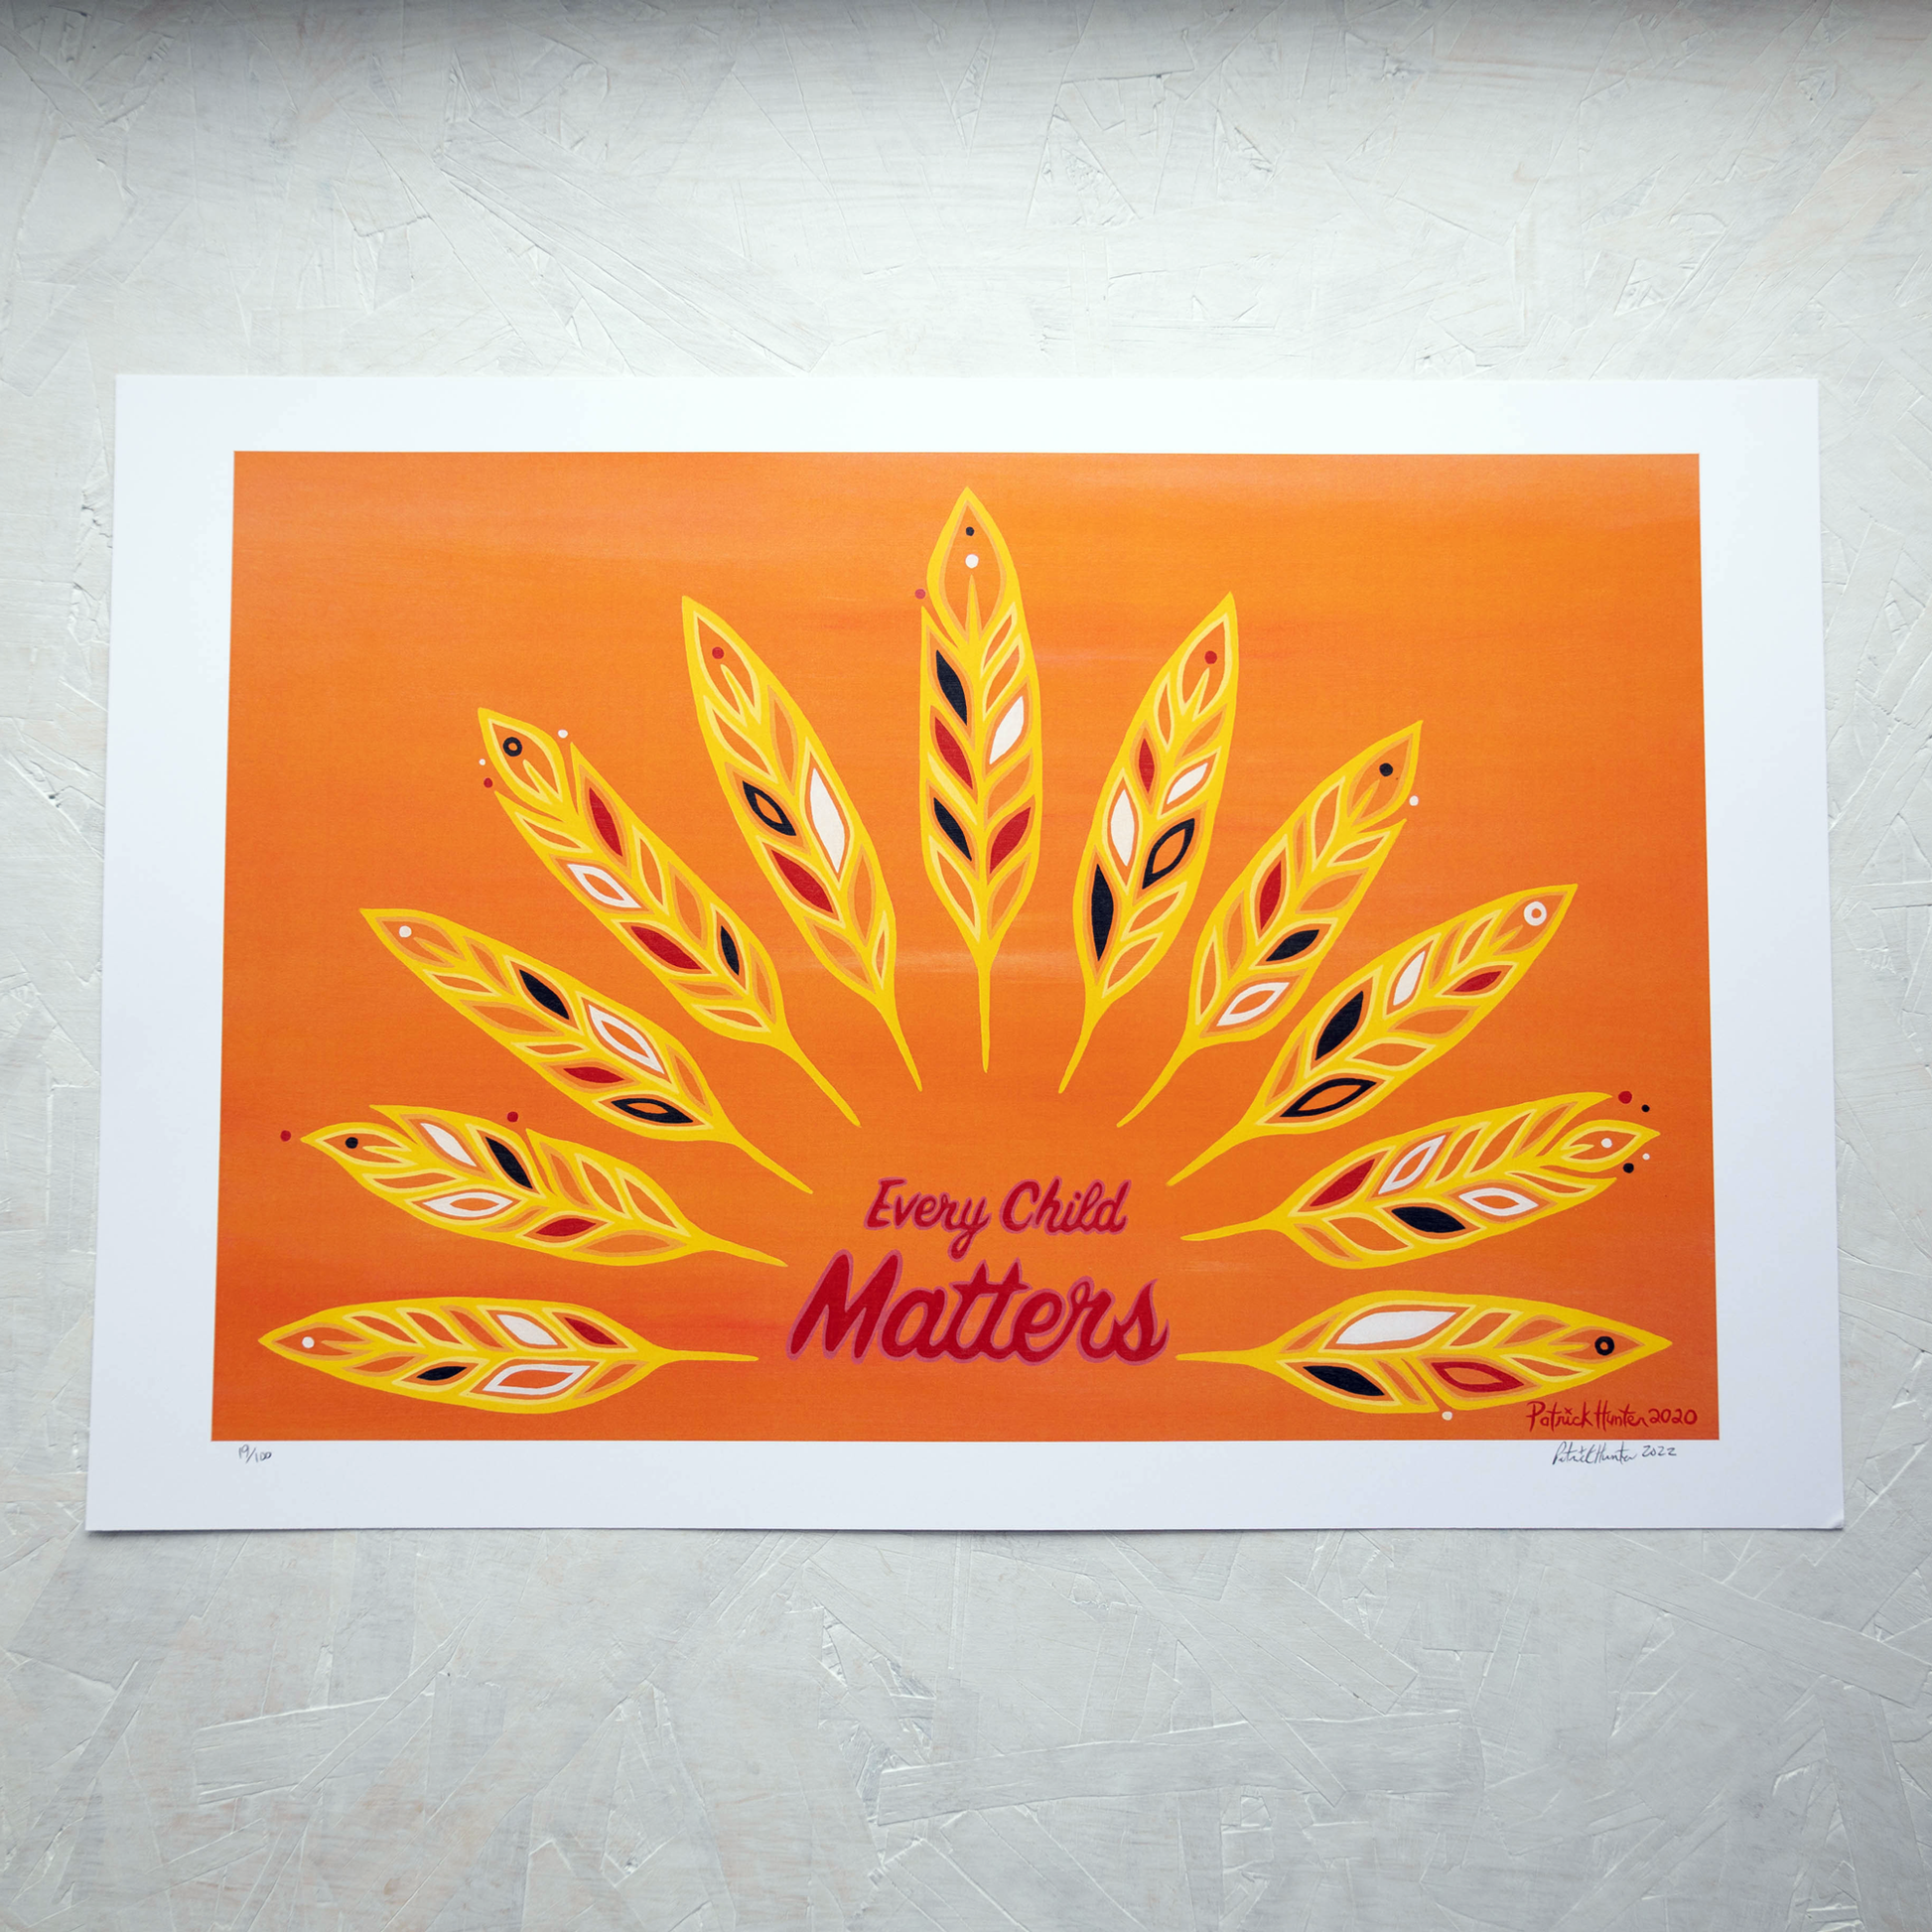 Print of Patrick Hunter's painting of feathers on an orange background radiating out from text that reads Every Child Matters, woodland art style.